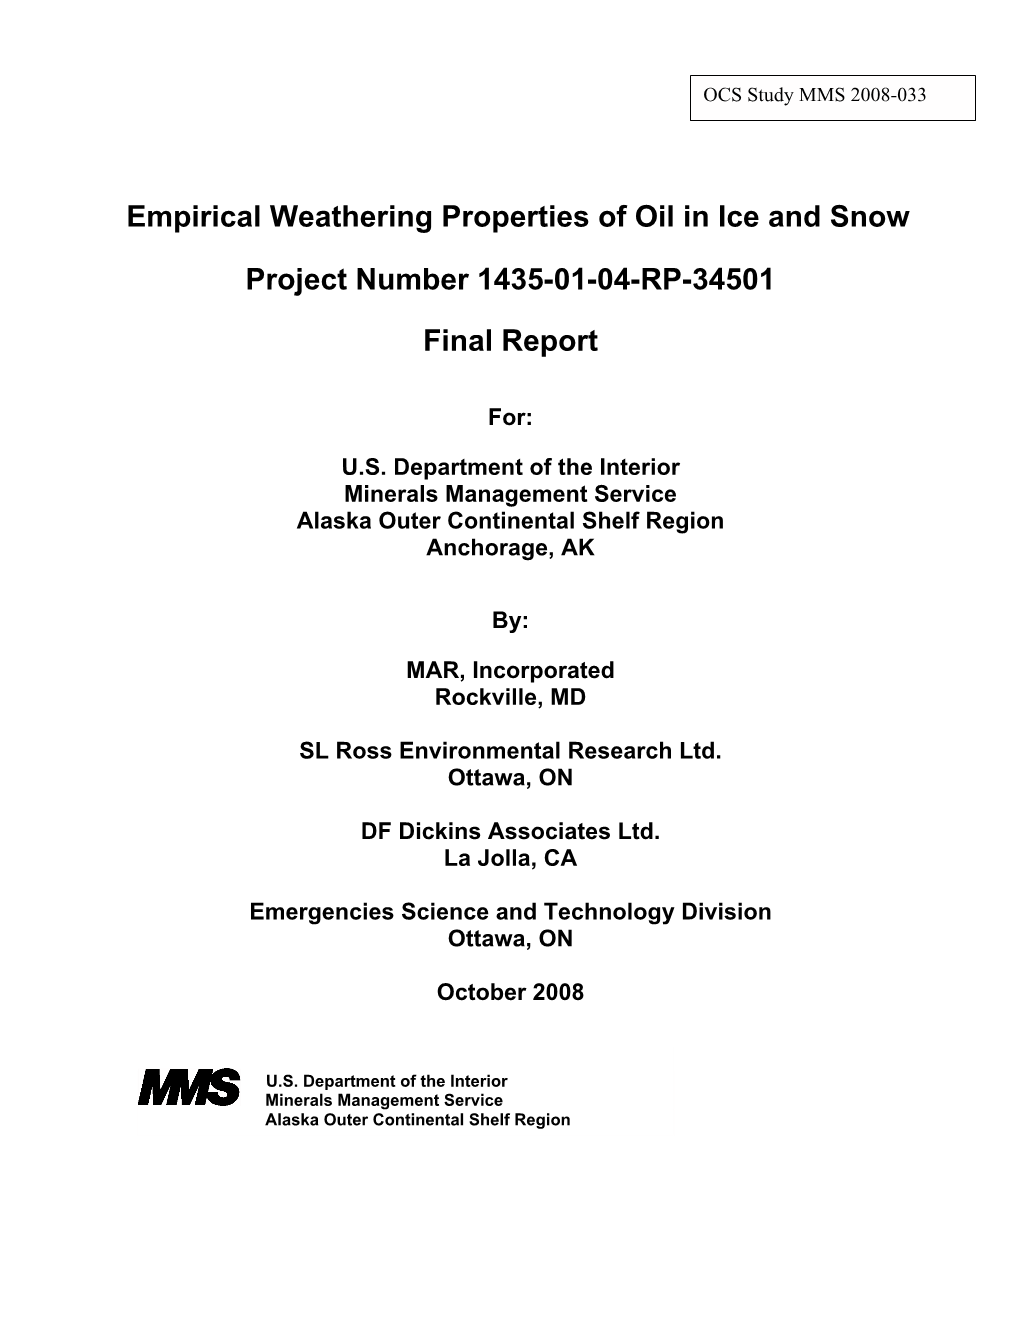 Empirical Weathering Properties of Oil in Ice and Snow